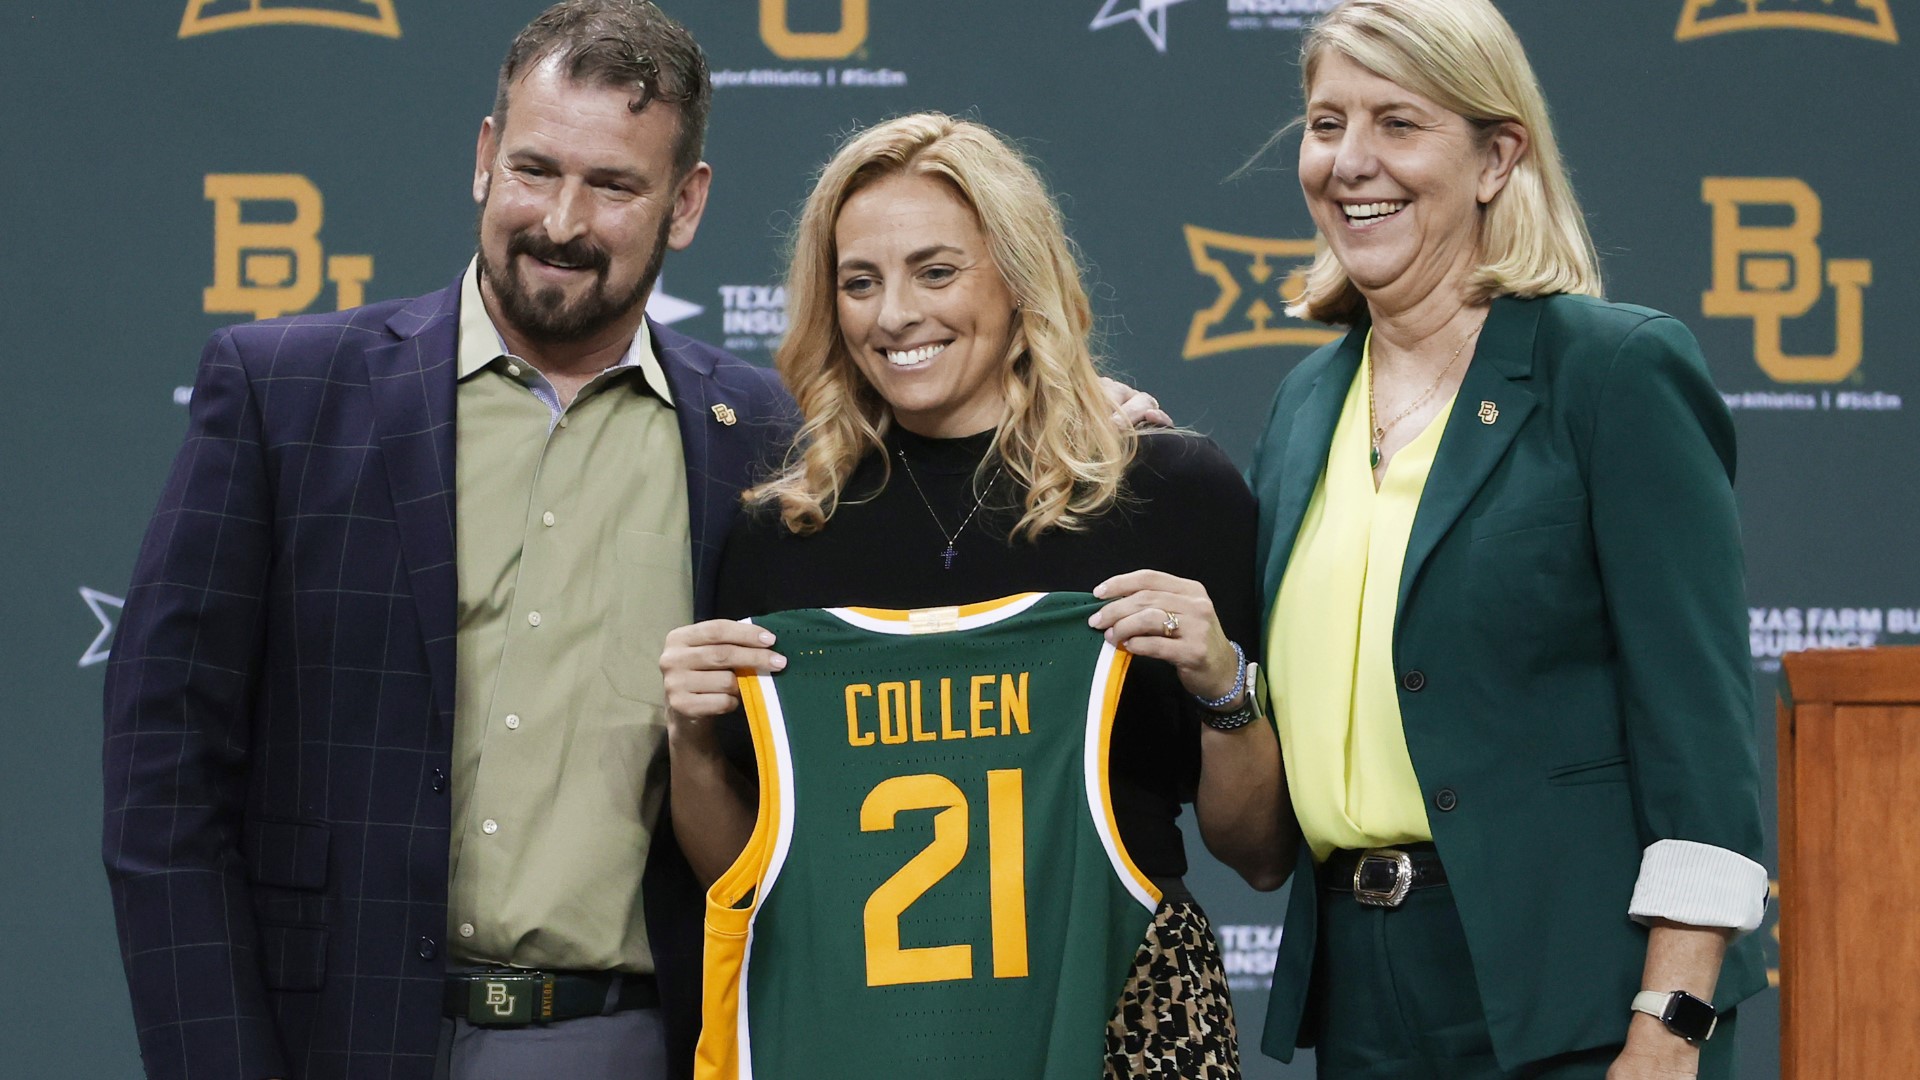 For the first time in 21 years, Baylor introduced a new women's basketball coach.